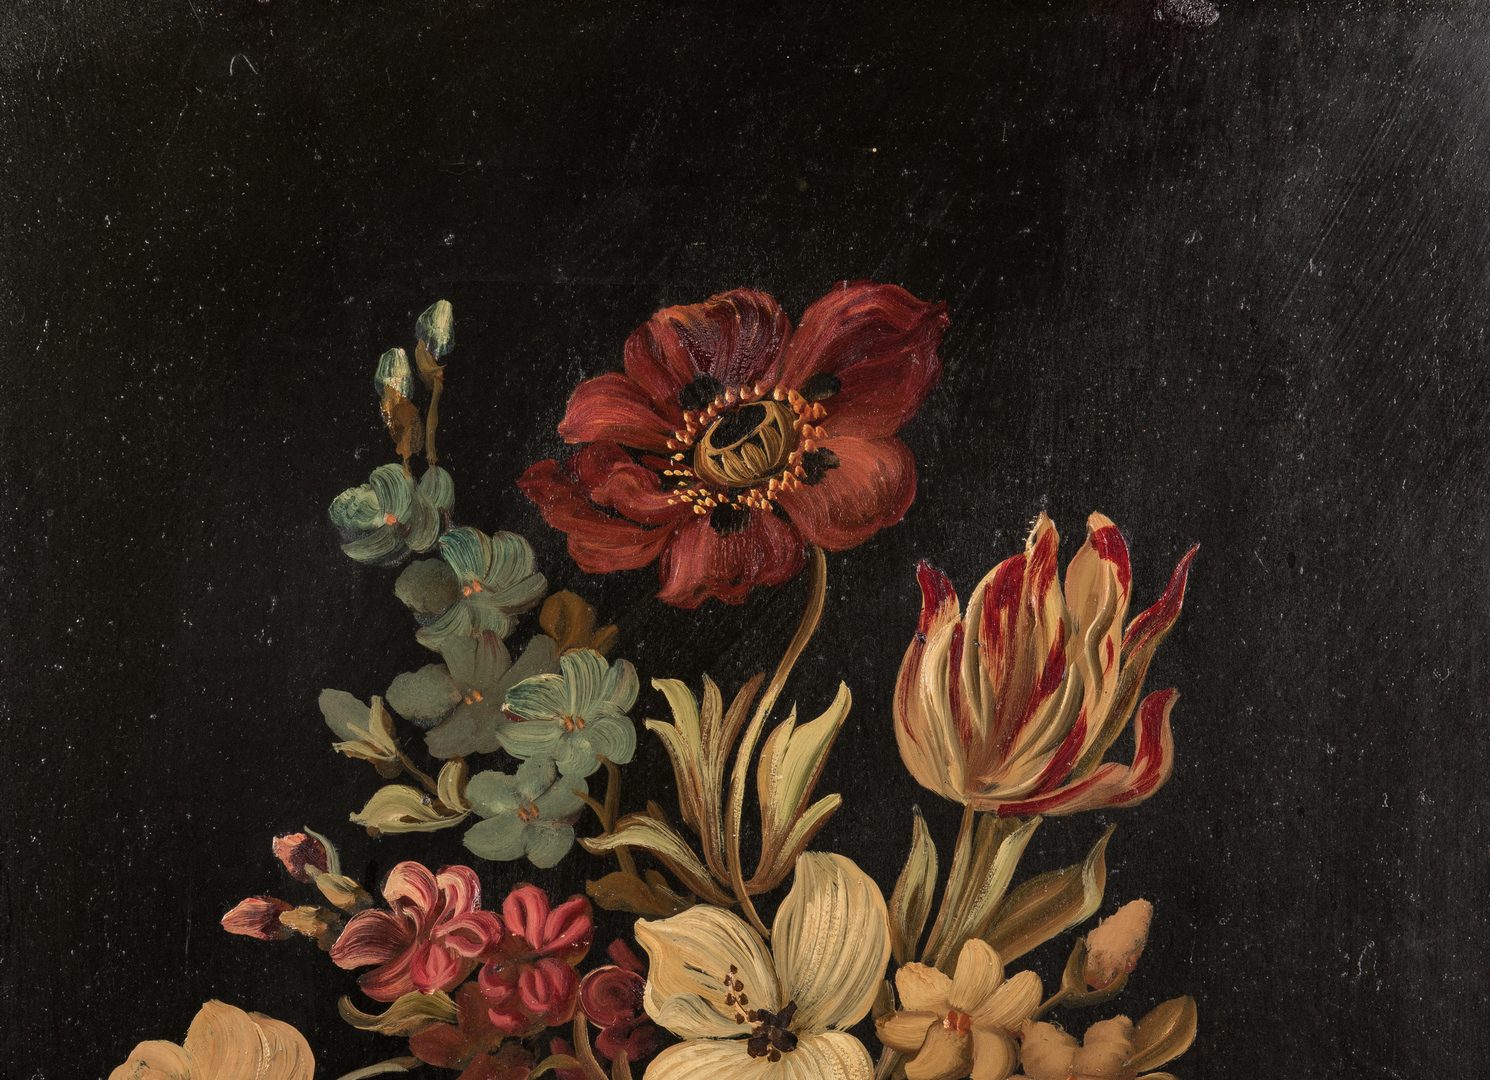 Lot 204: Pair of Floral Still Life O/B Paintings